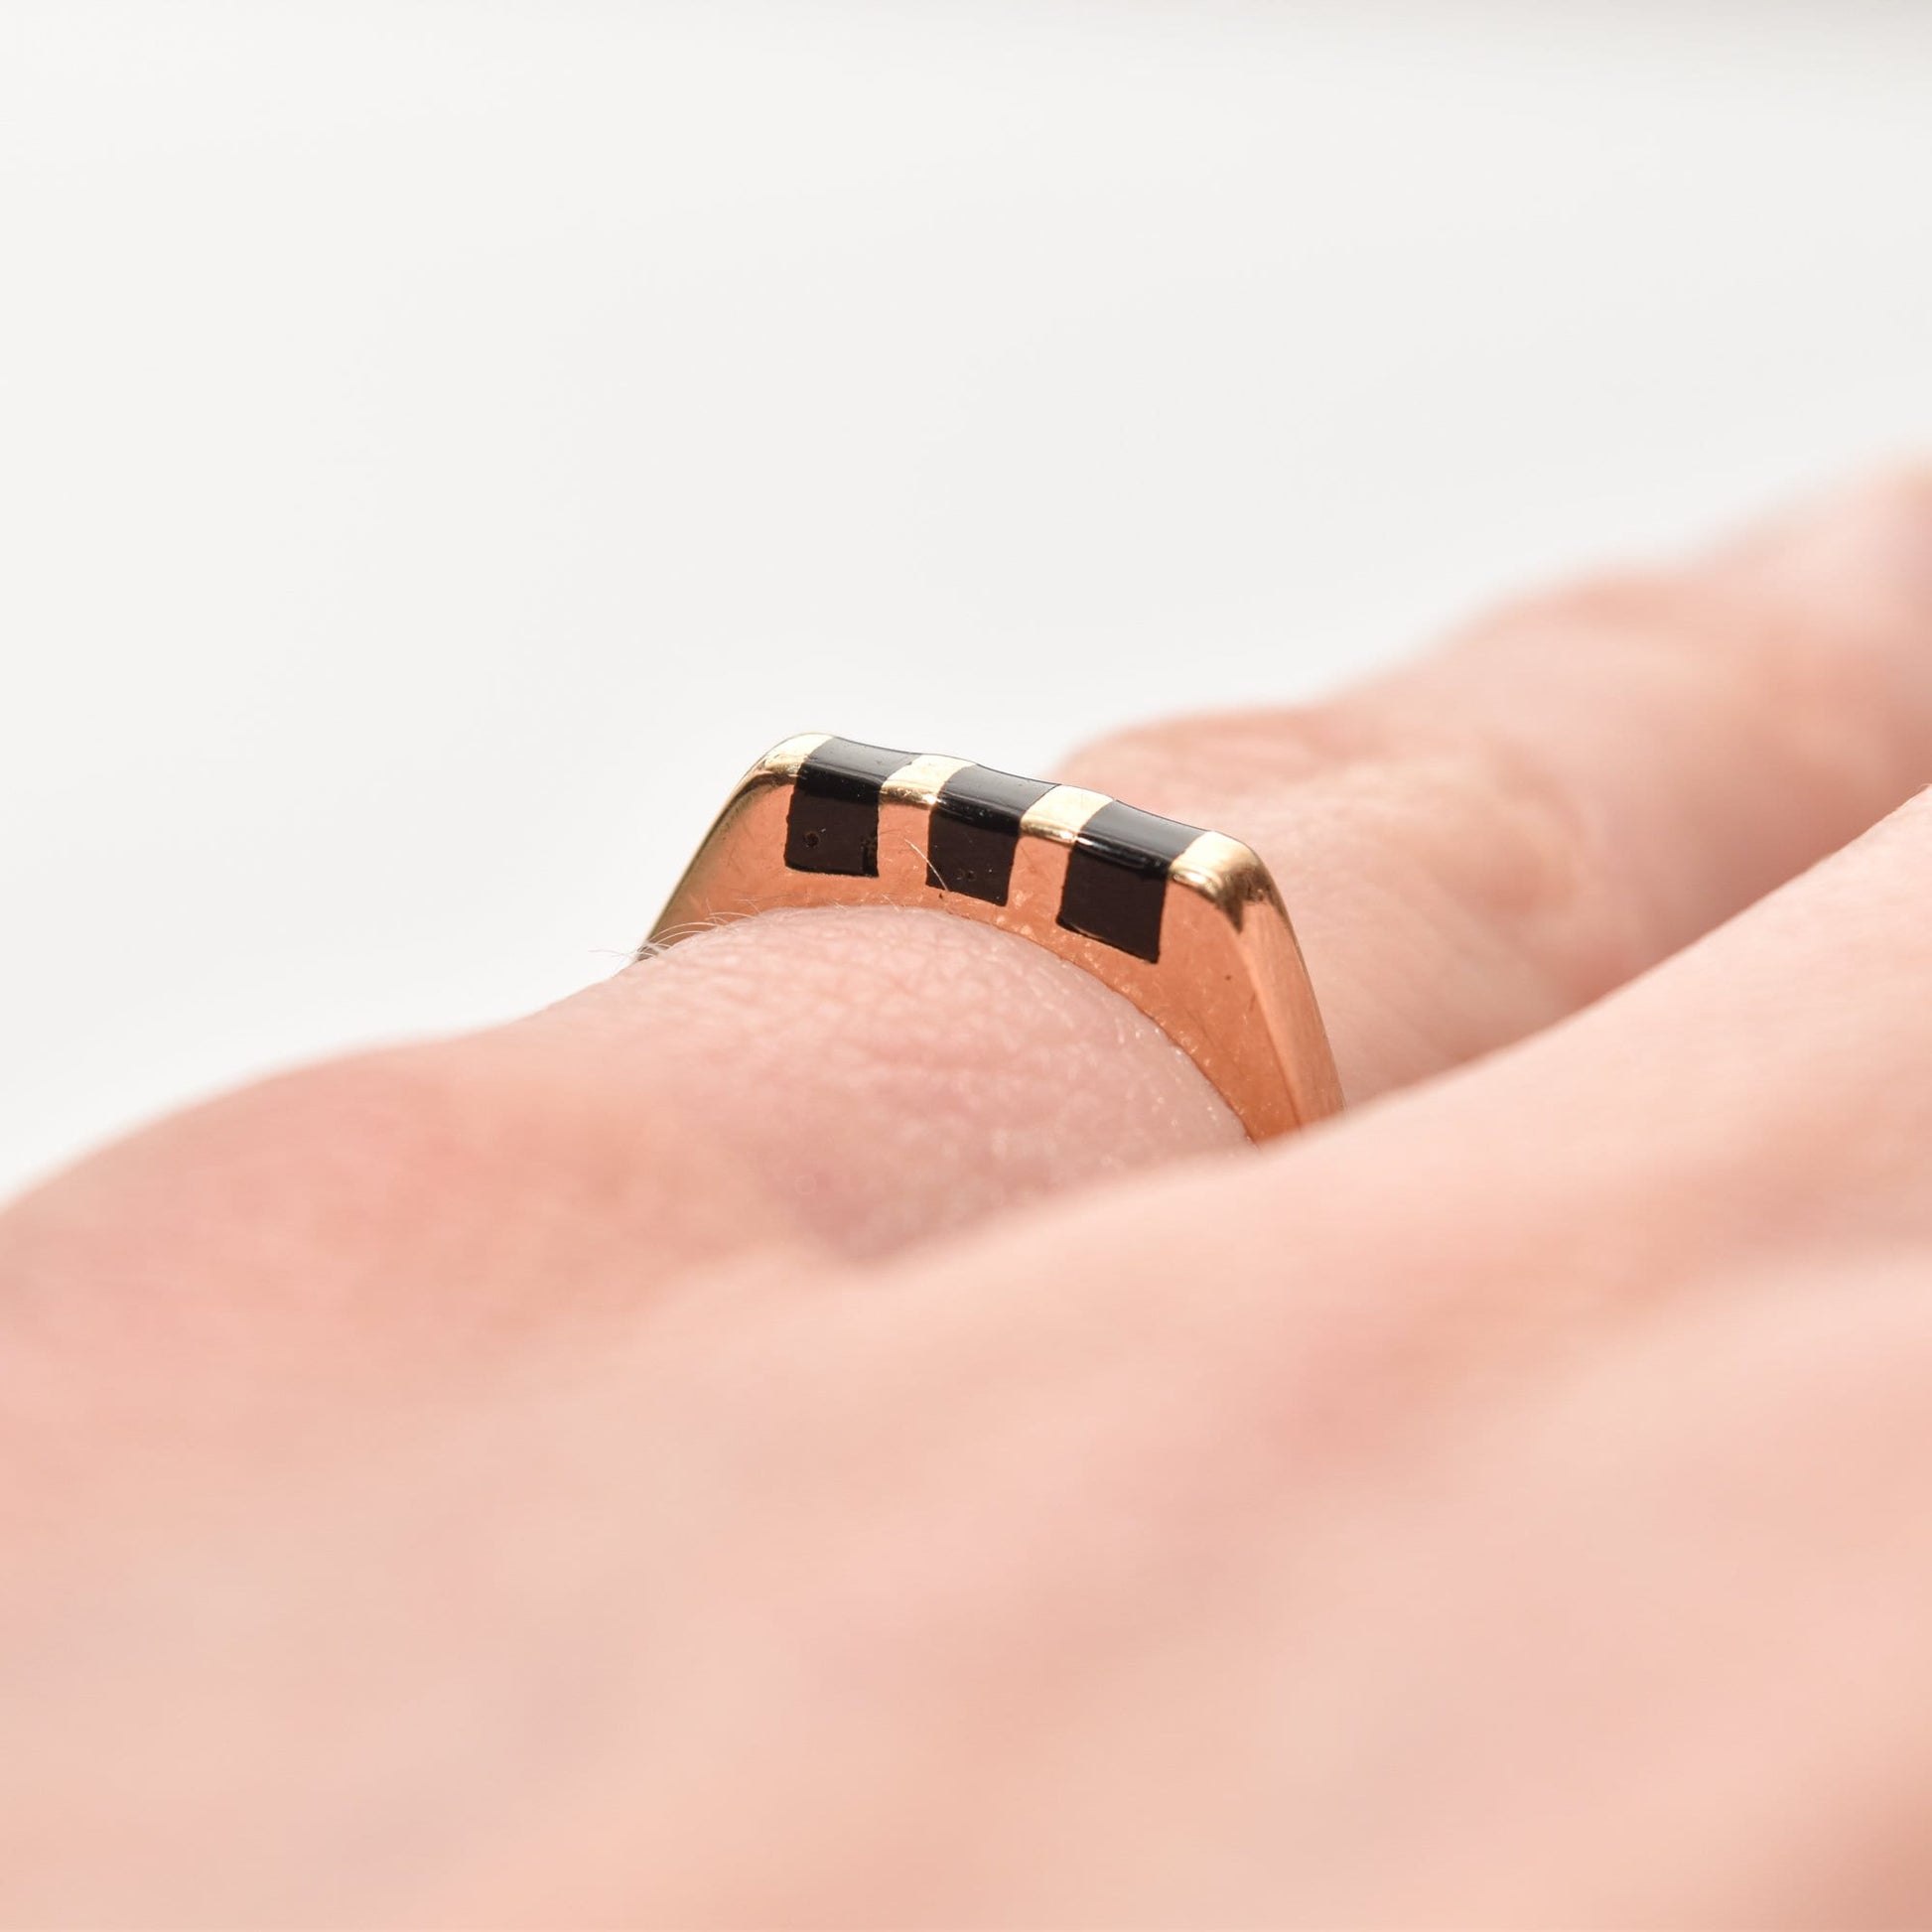 Minimalist 14K black onyx inlay ring on finger, striped yellow gold stacking ring, size 5.5 US, close-up display.